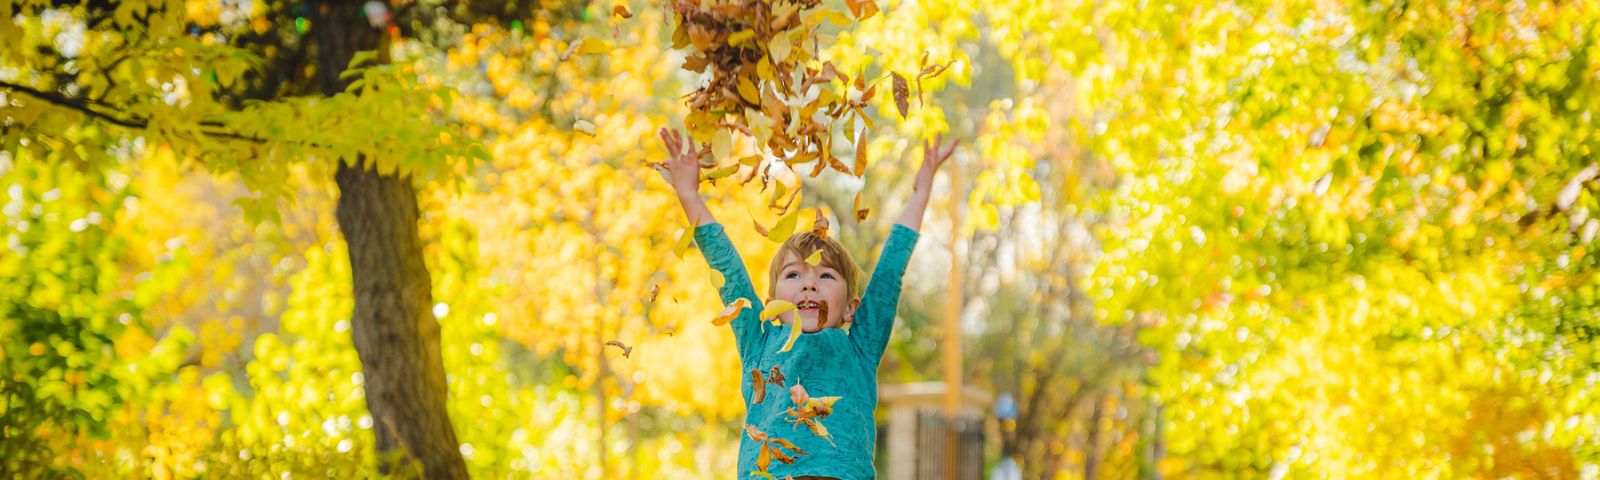 Child throwing leaves into the air